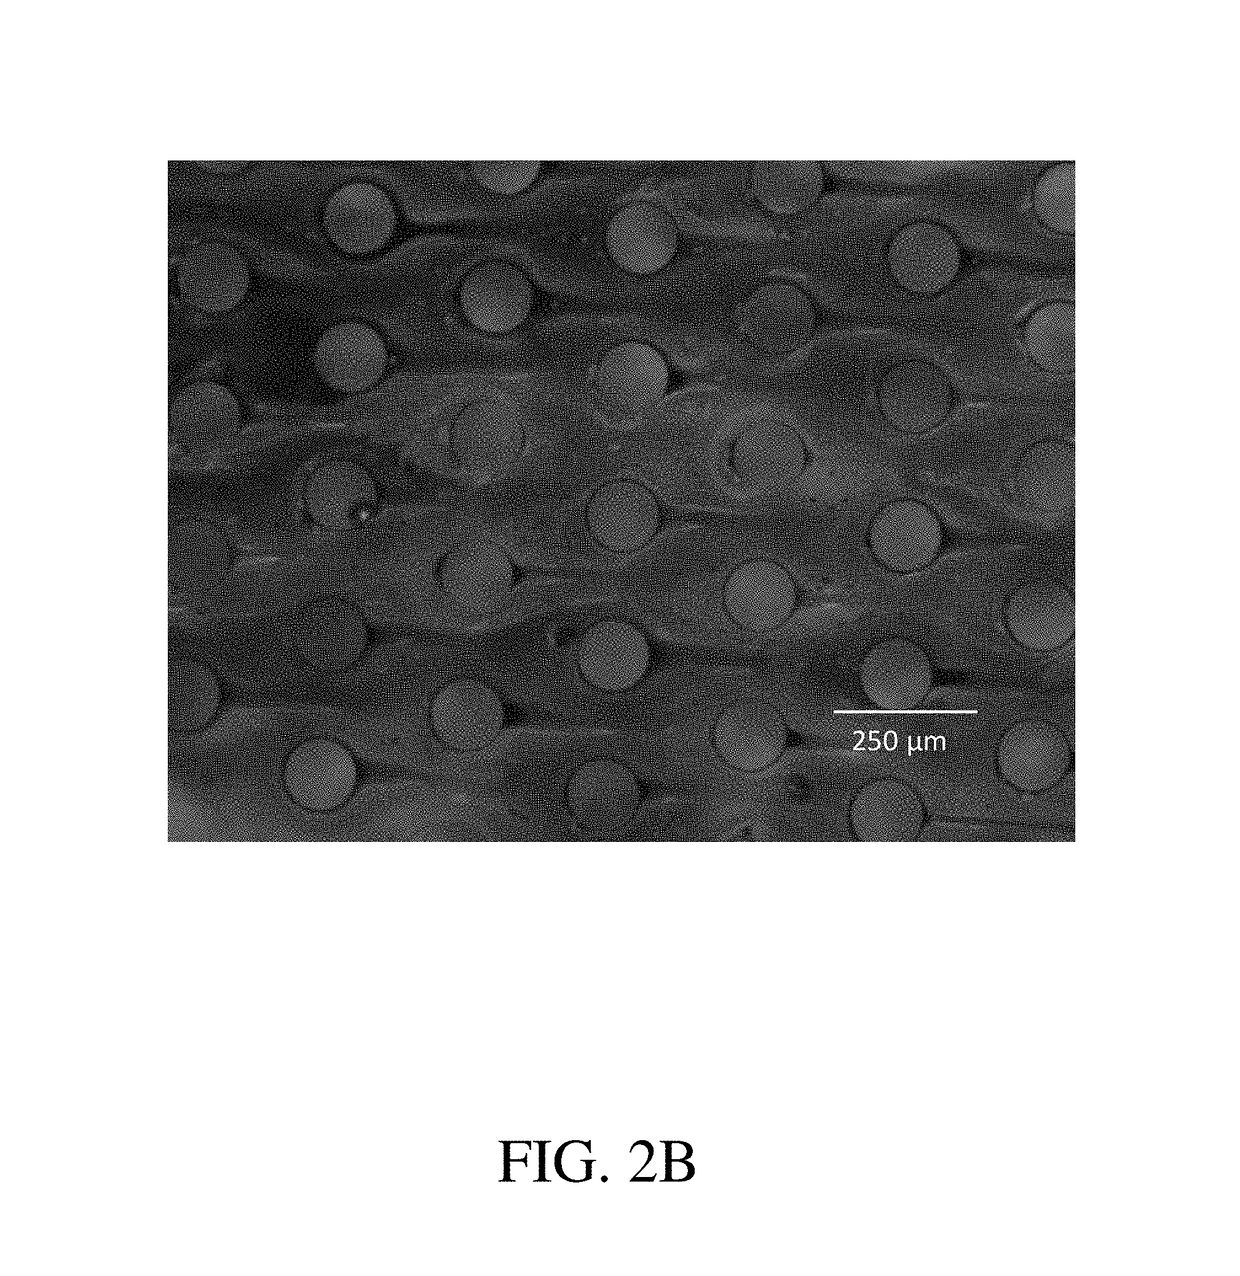 Compositions comprising aromatic ester solvents for use in oil and/or gas wells and related methods